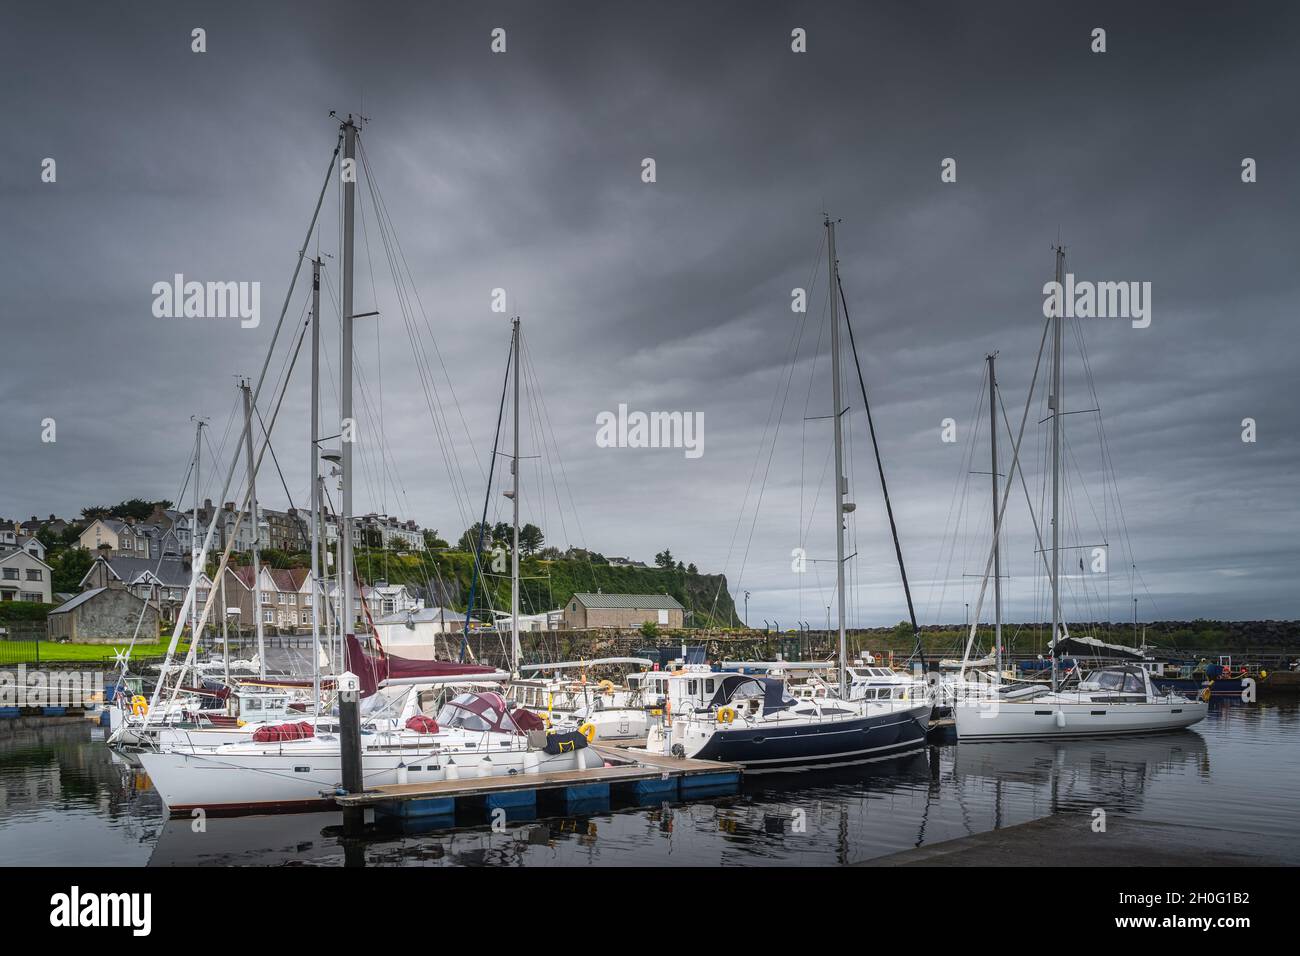 Yachts and sailboats moored in small, beautiful marina in Ballycastle town with dark storm clouds, Antrim, Northern Ireland Stock Photo